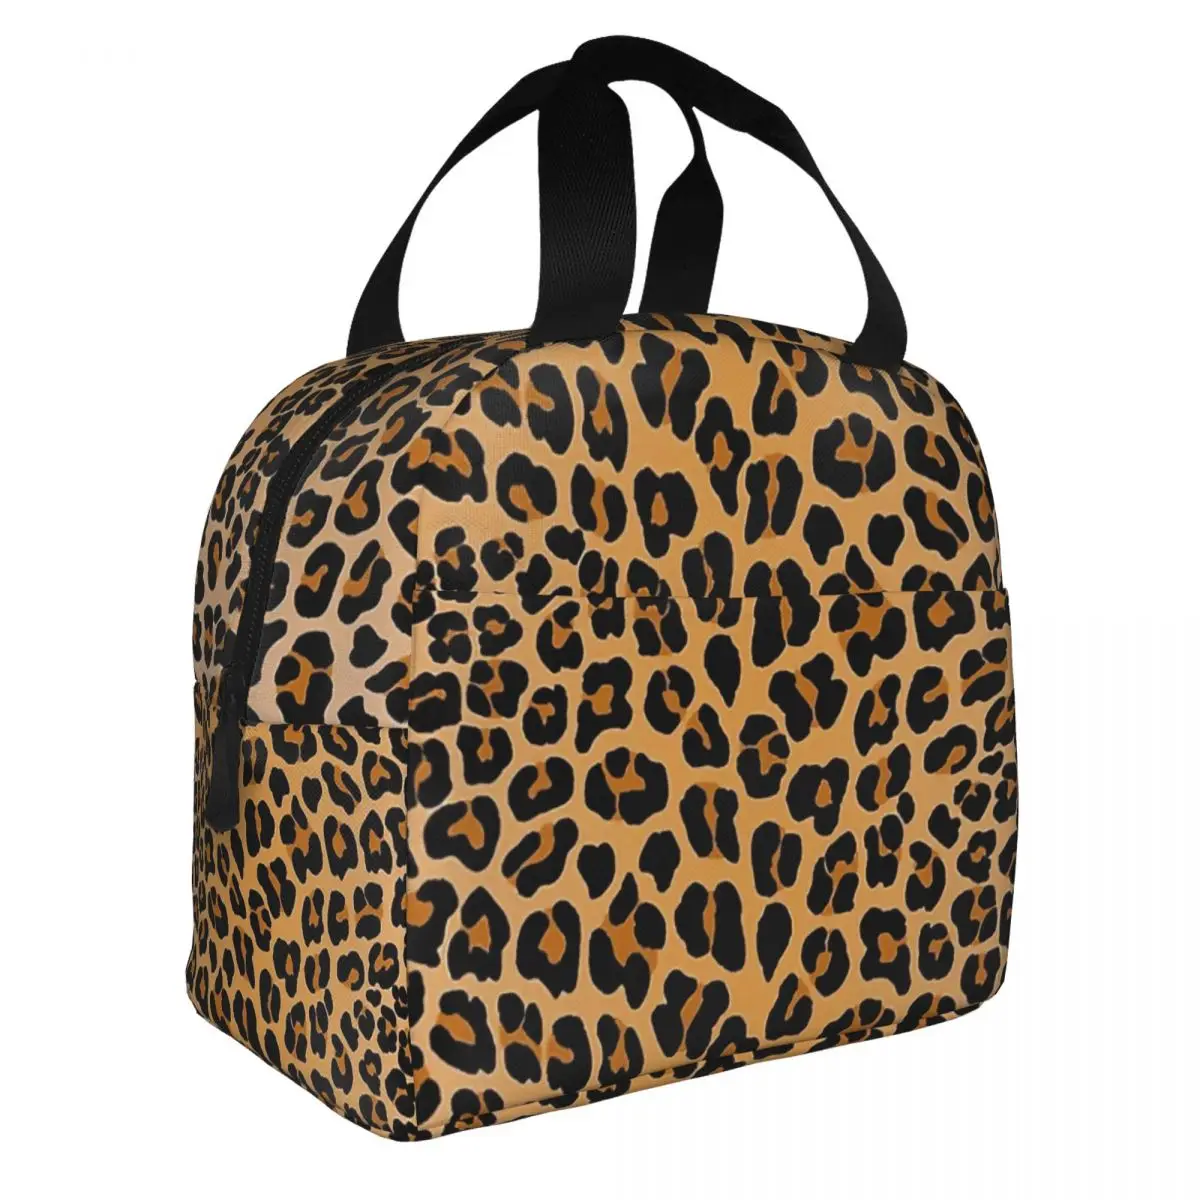 Leopard Print Lunch Bento Bags Portable Aluminum Foil thickened Thermal Cloth Lunch Bag for Women Men Boy